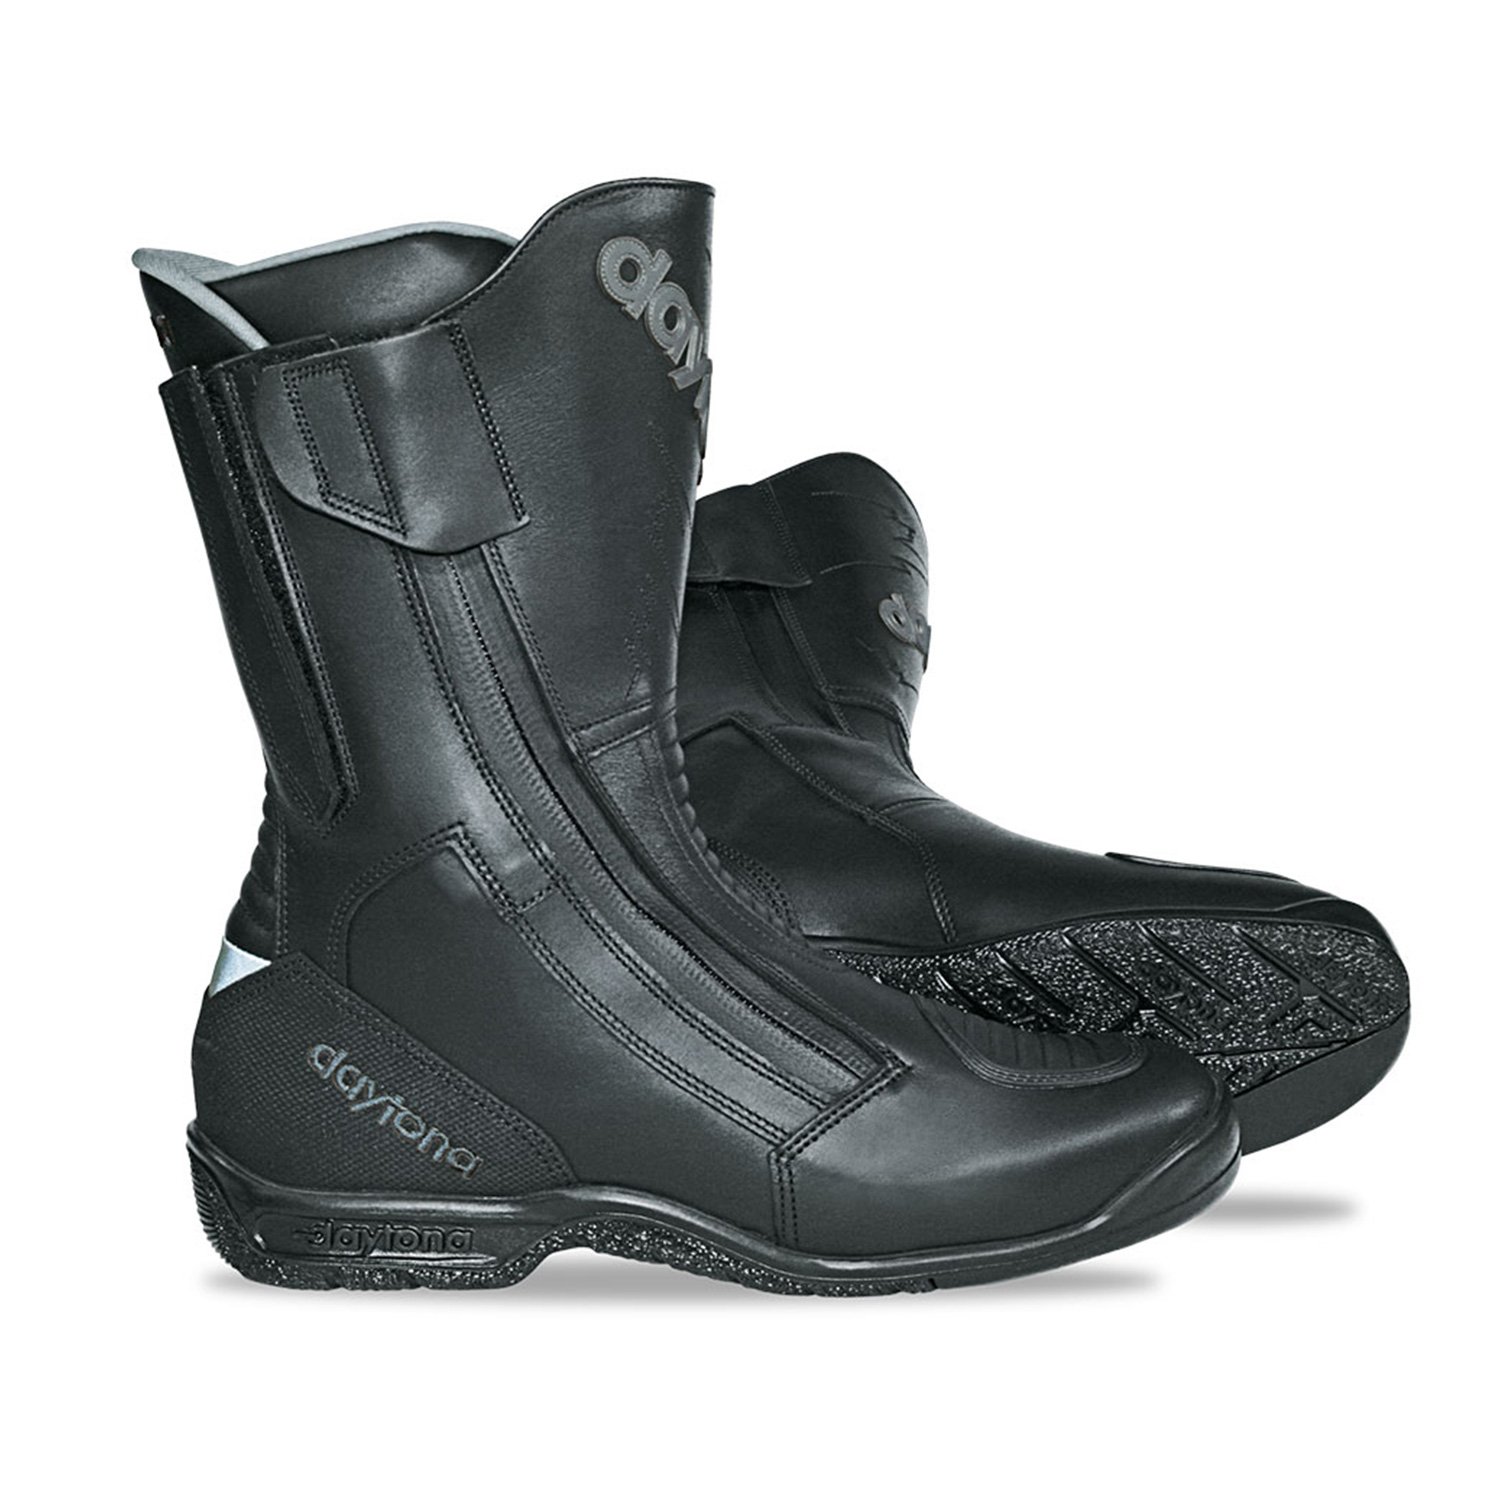 Image of Daytona Road Star X-Wide [XL] Noir Bottes Taille 40